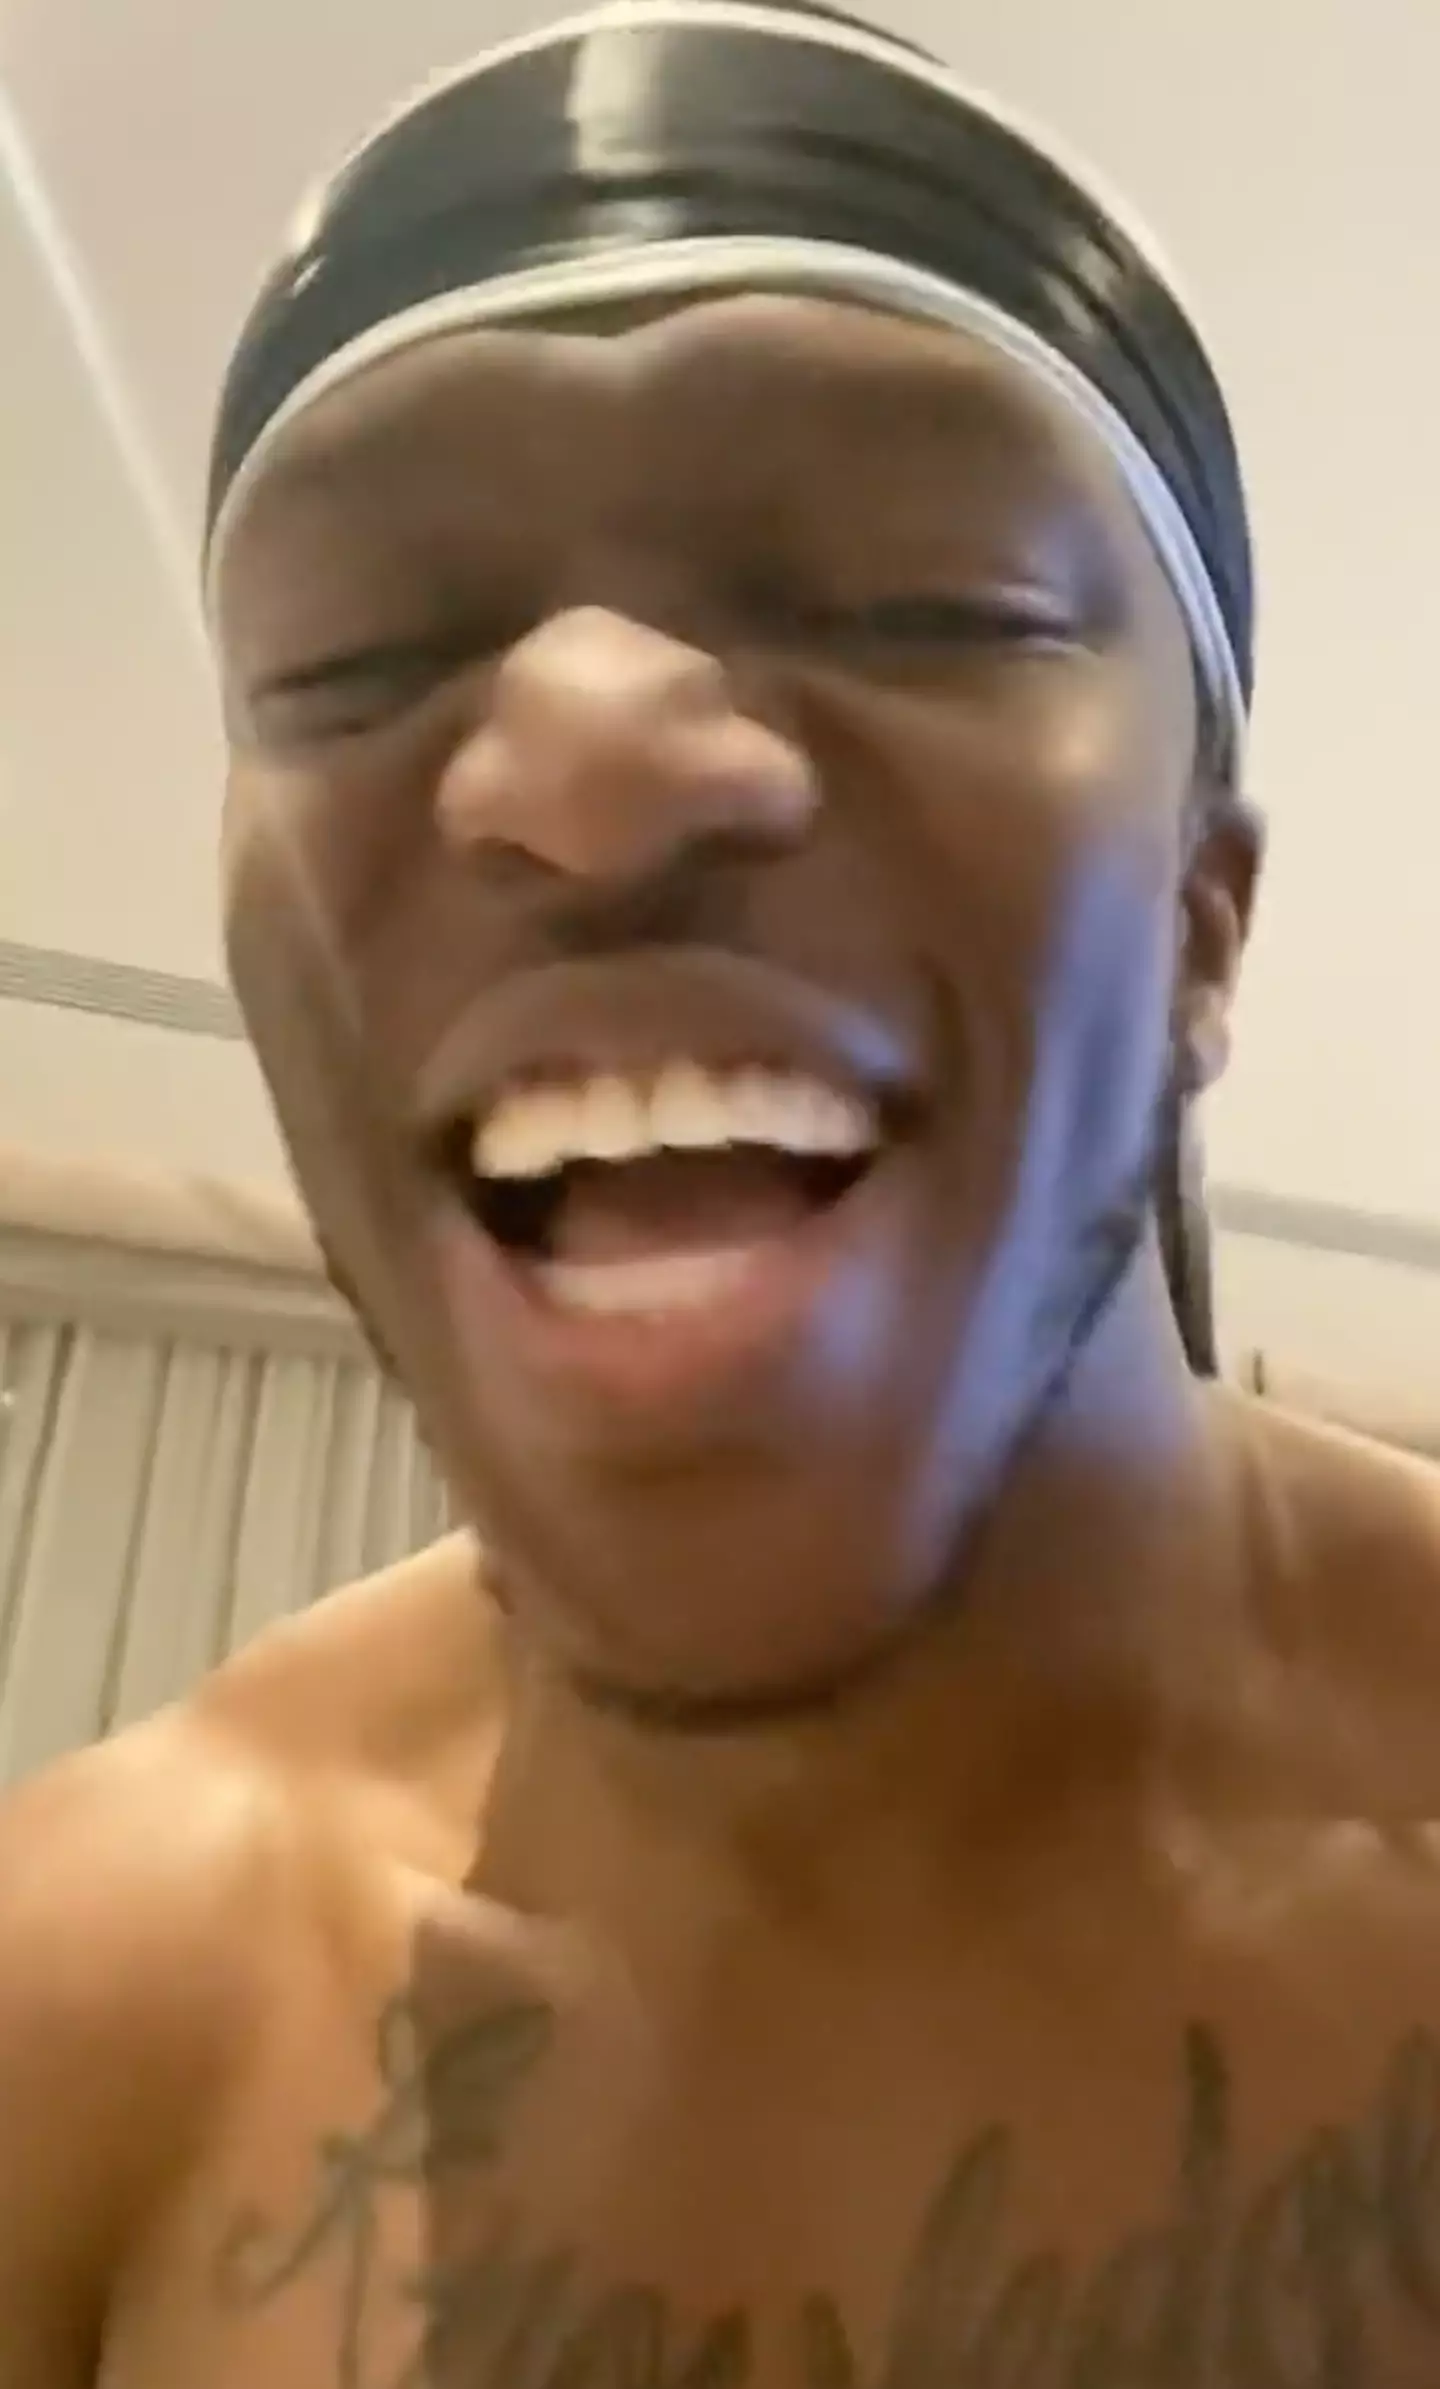 KSI couldn't contain himself after Jake Paul's defeat.